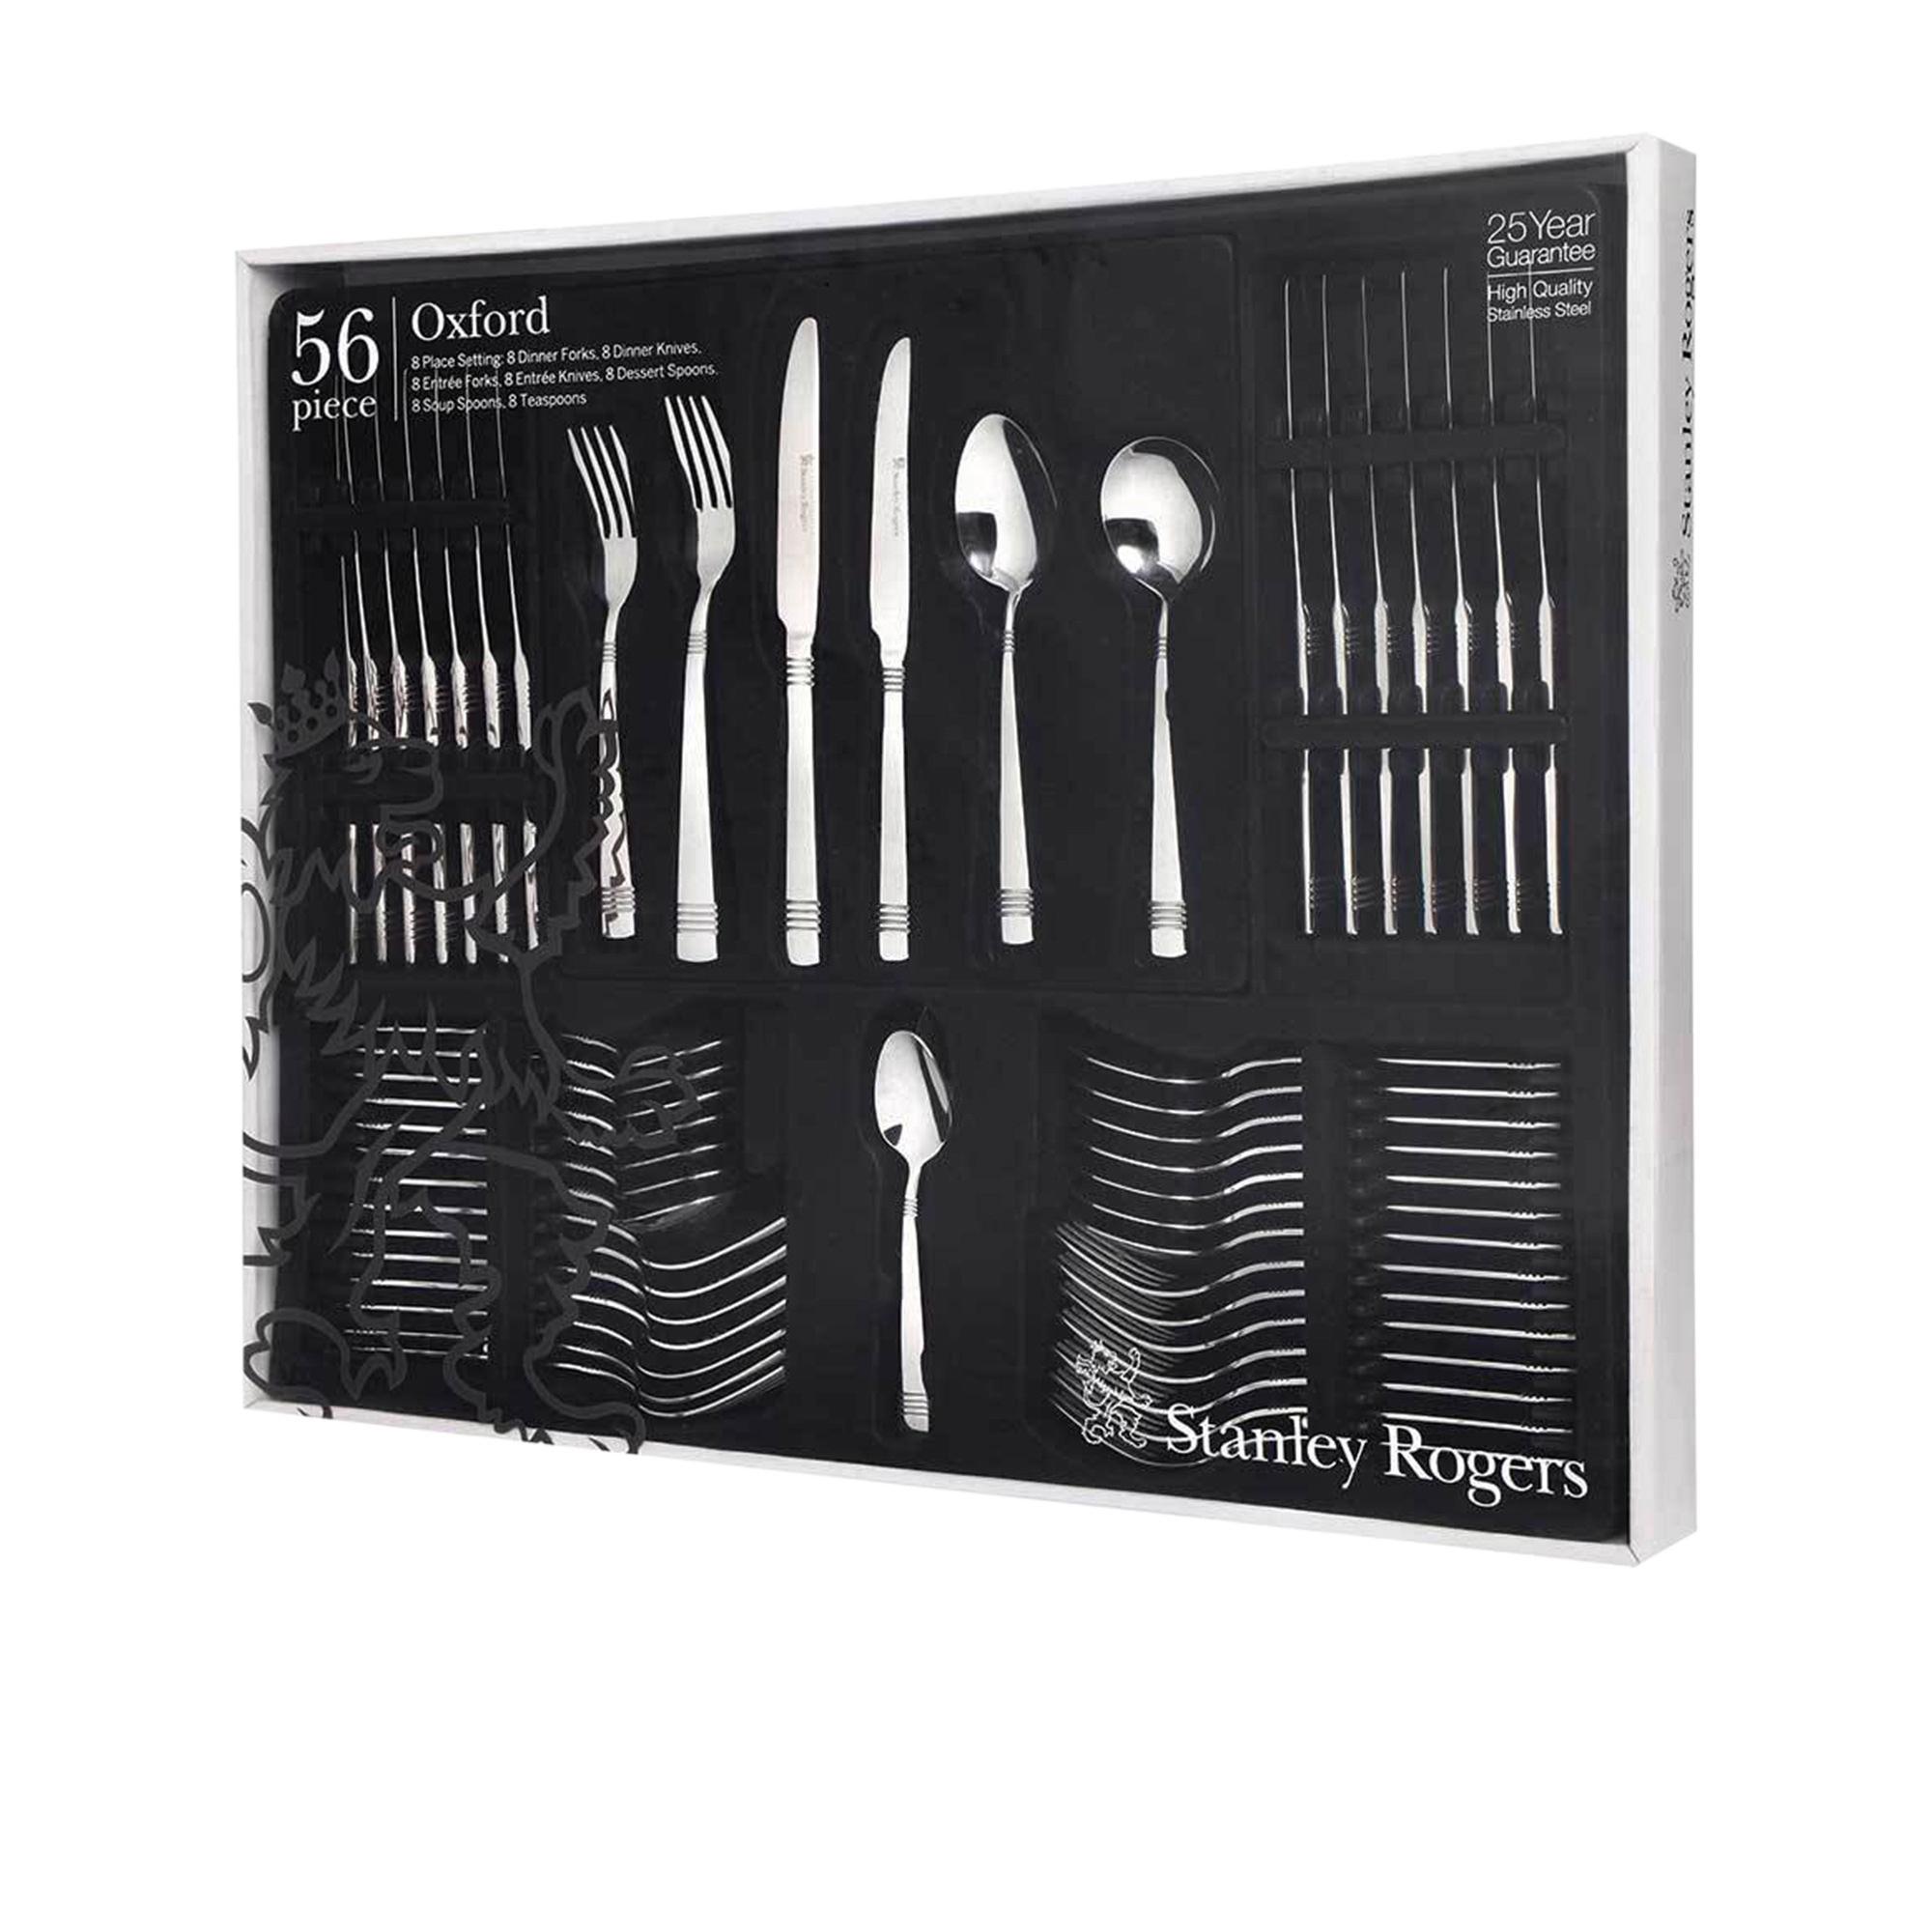 Stanley Rogers Oxford Cutlery Set 56pc Image 4